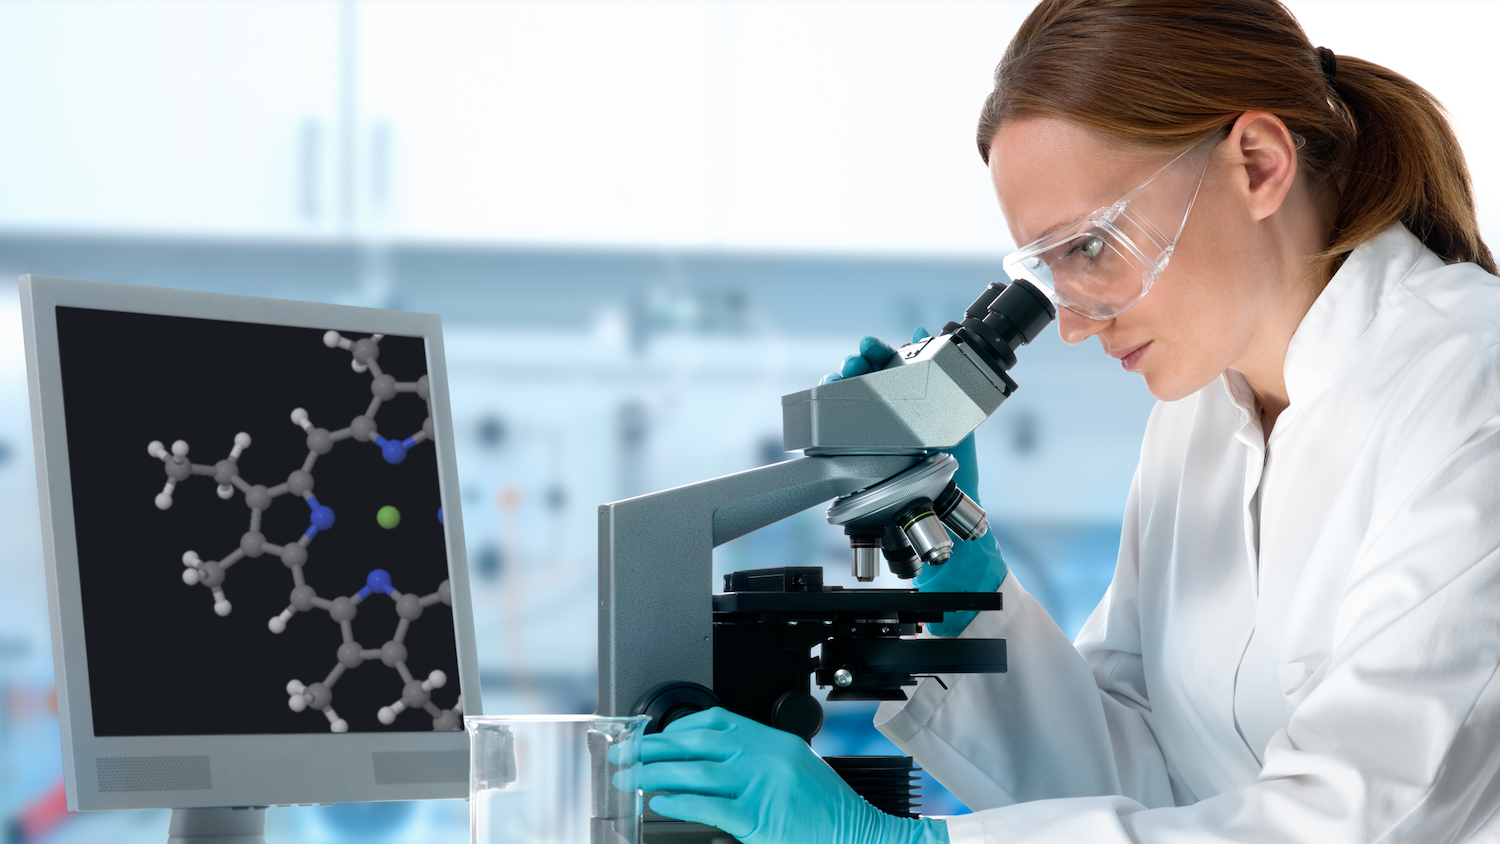 lab design image - woman using a microscope in a lab